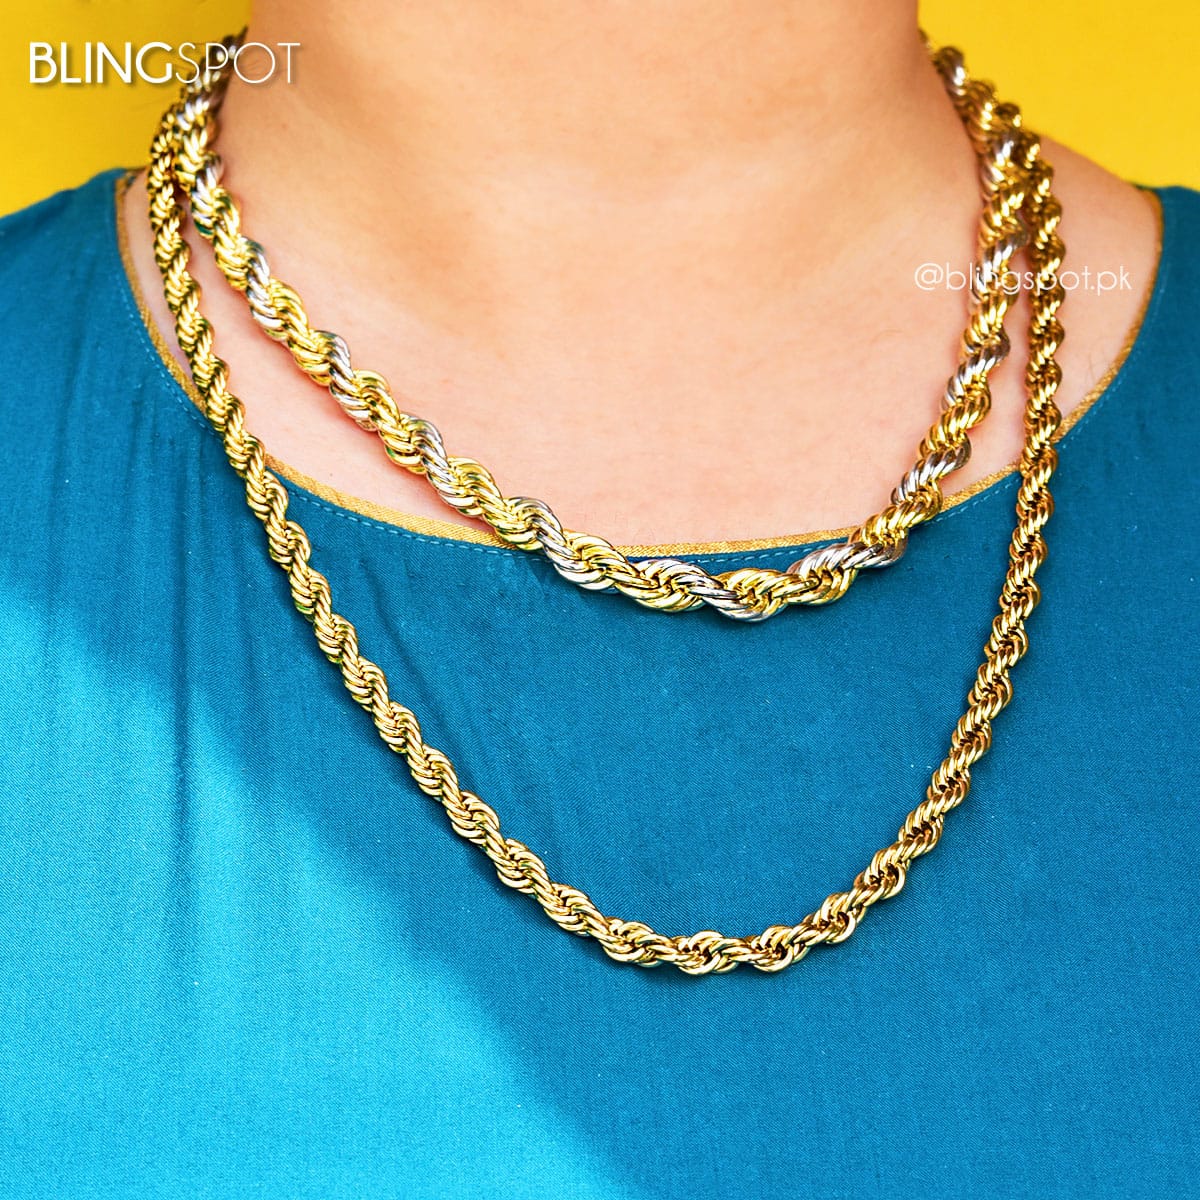 Chunky Chain Style 1 - Necklace